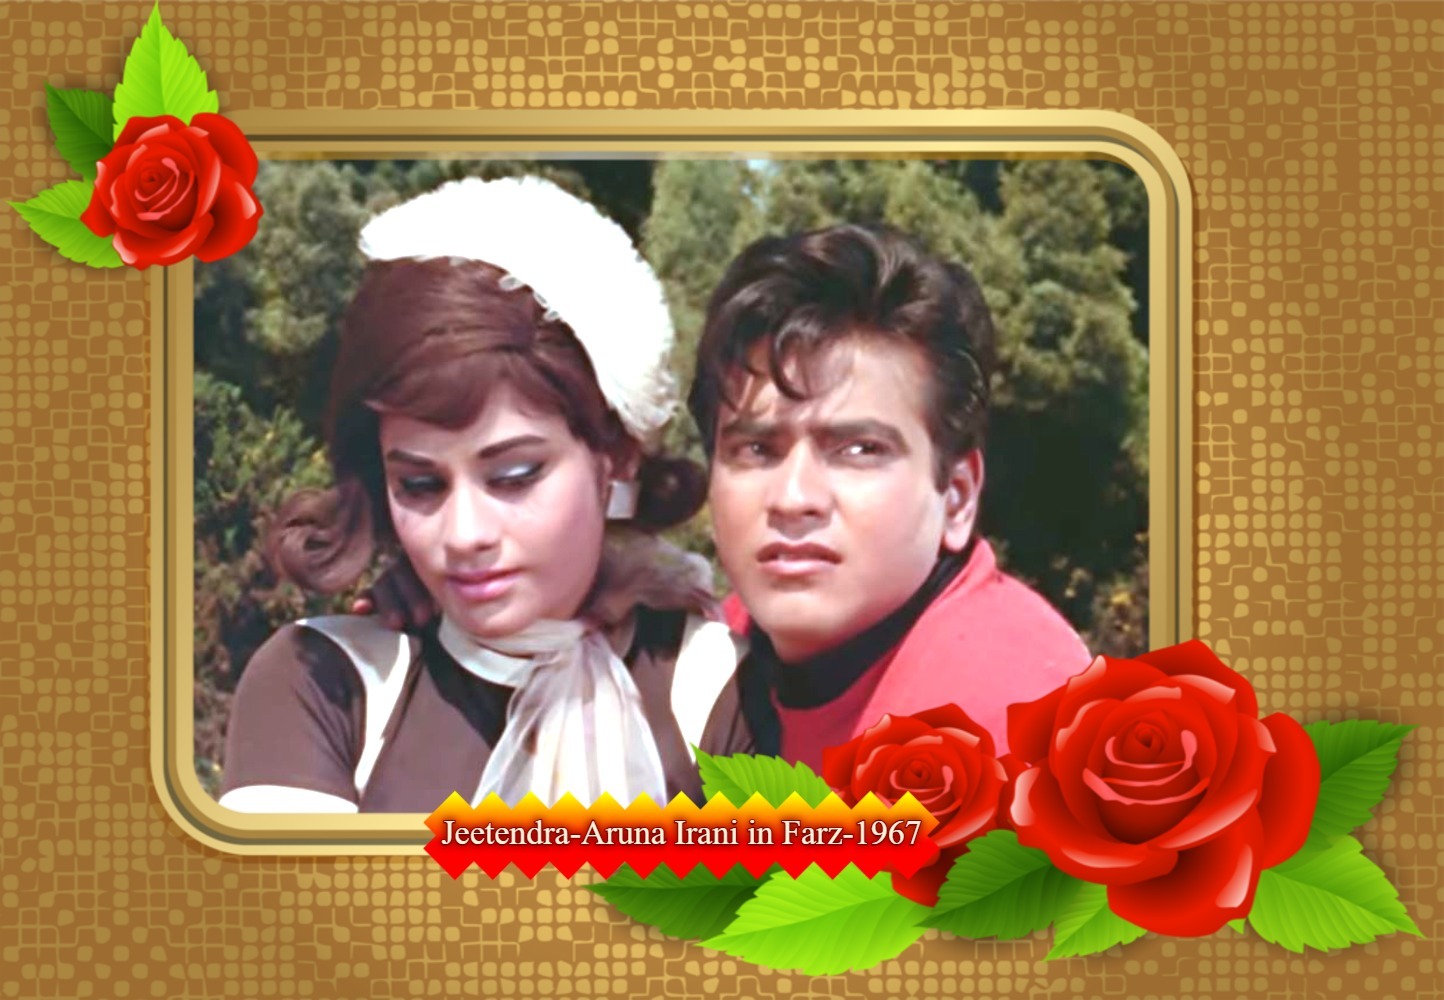 You are currently viewing “The Jumping Jack-Jeetendra”